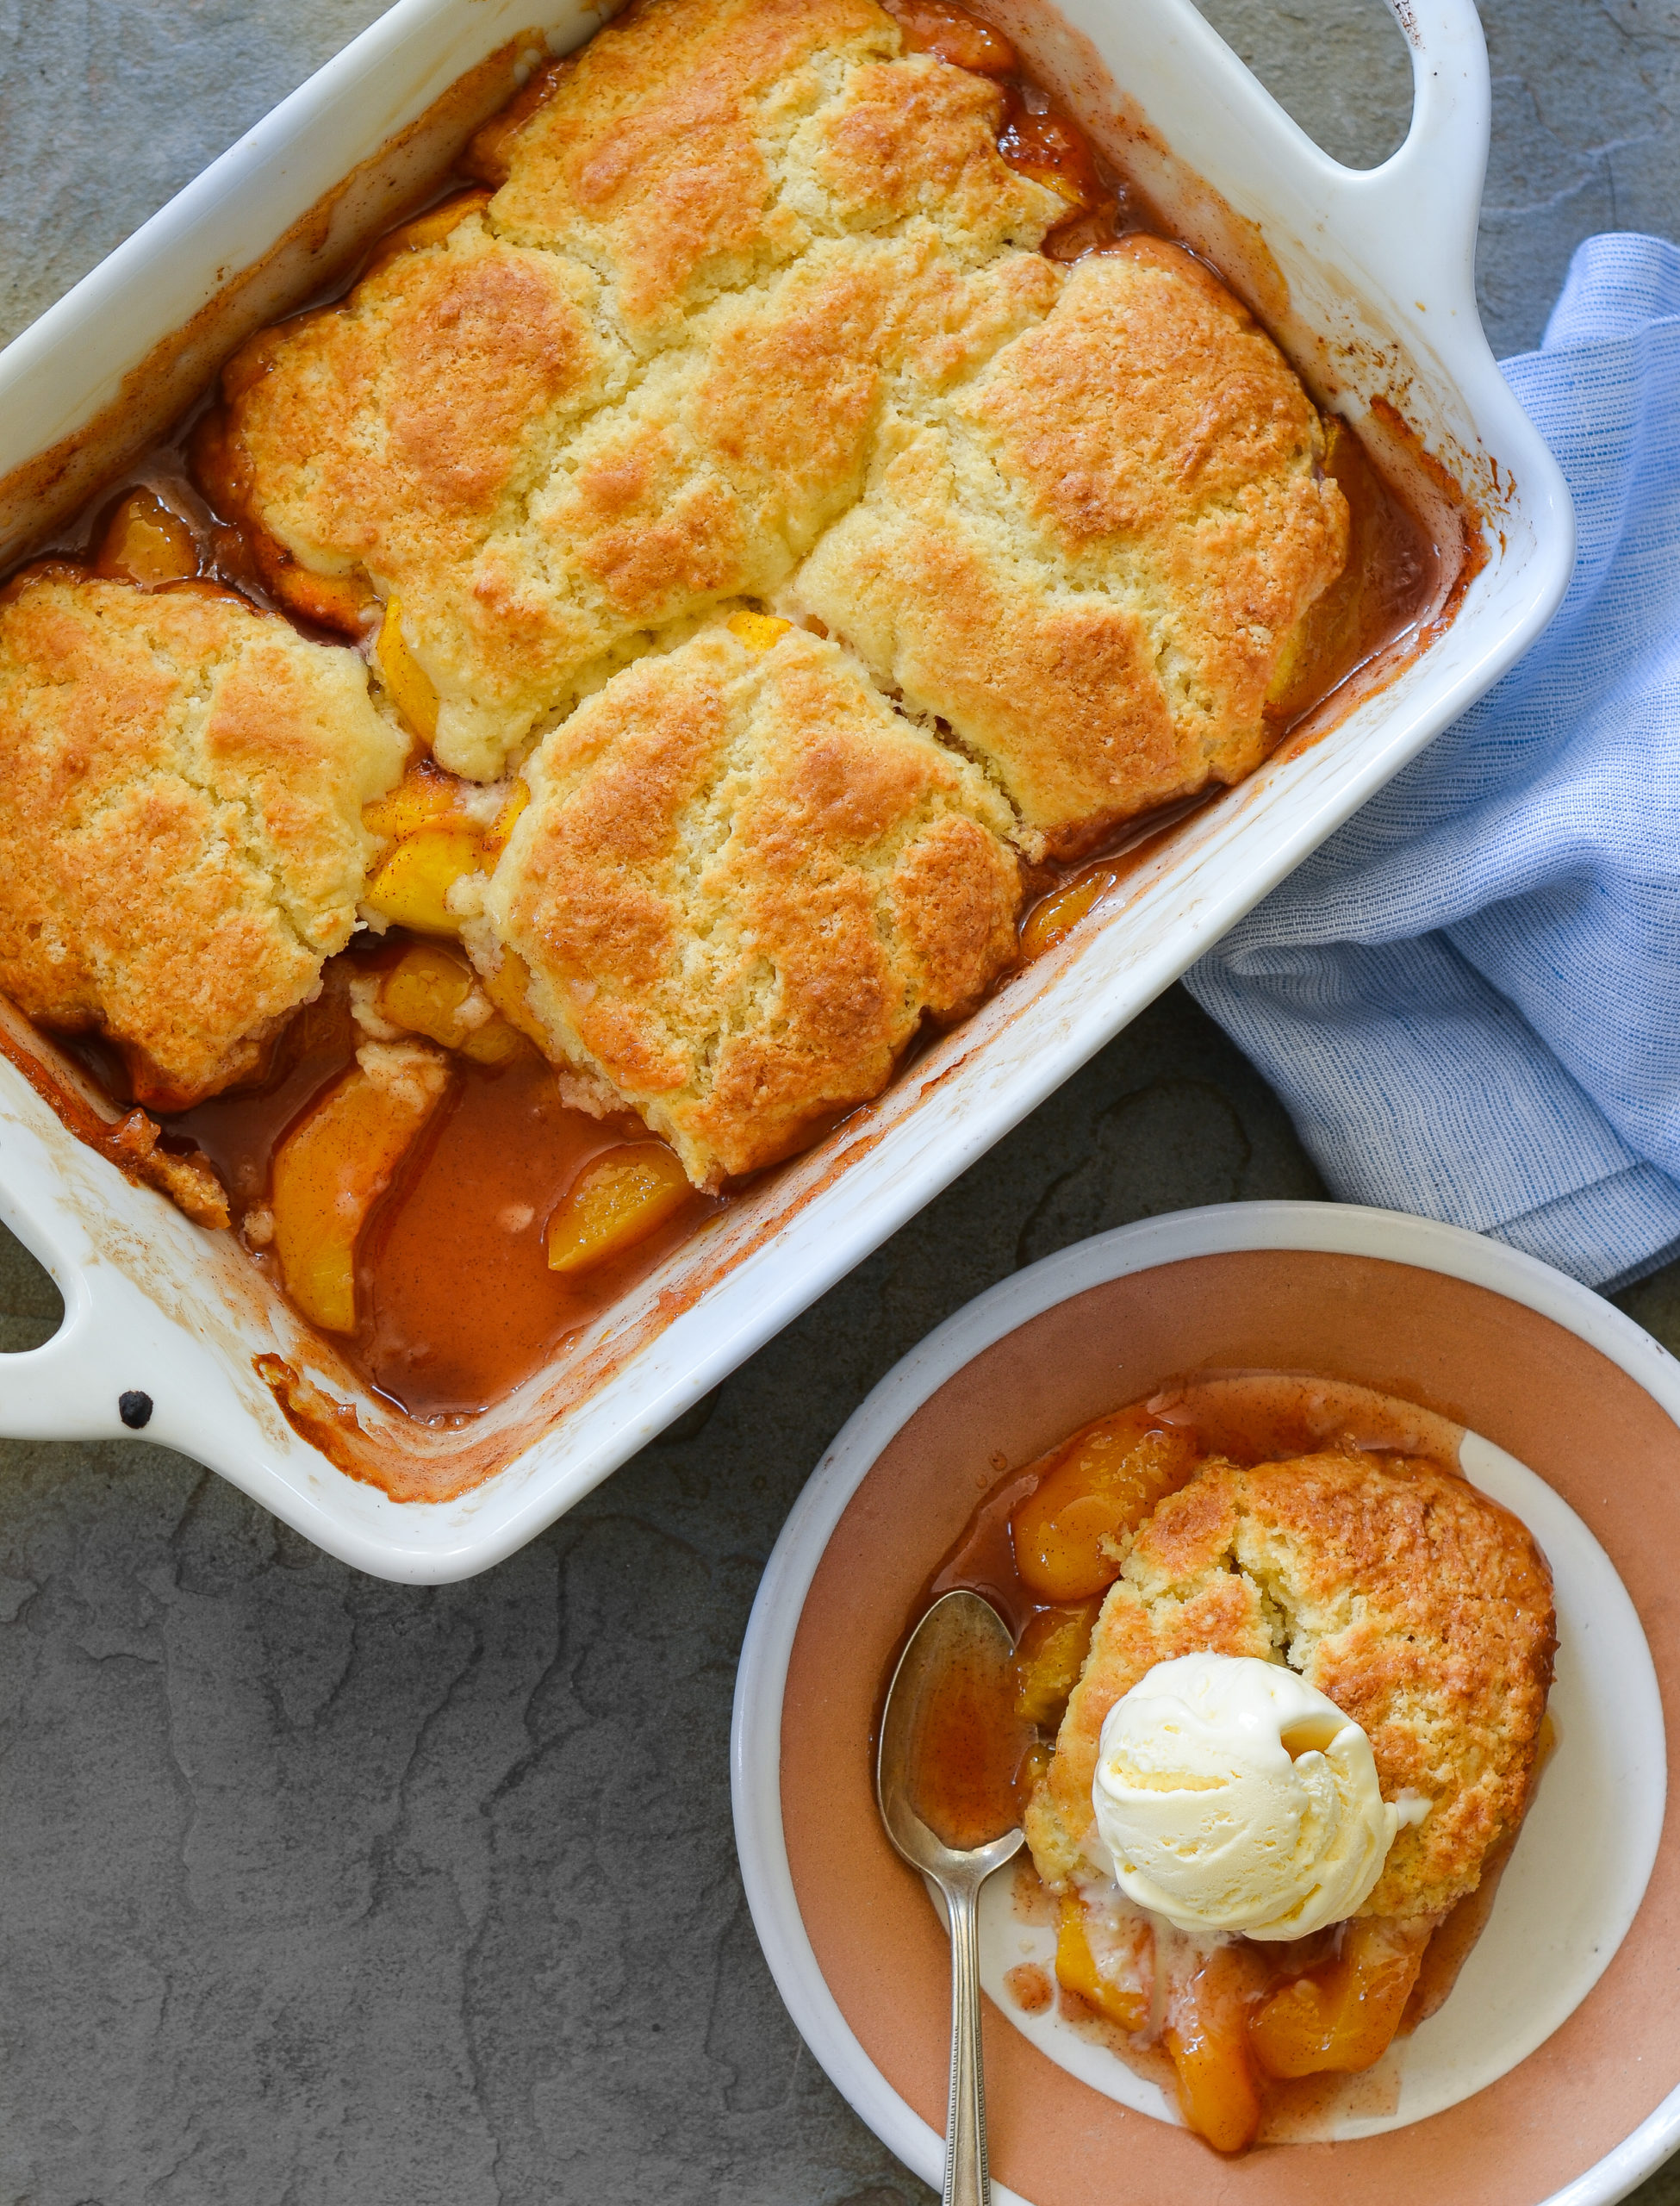 Bake it easy: How to make fruit cobbler with (almost) any fruit